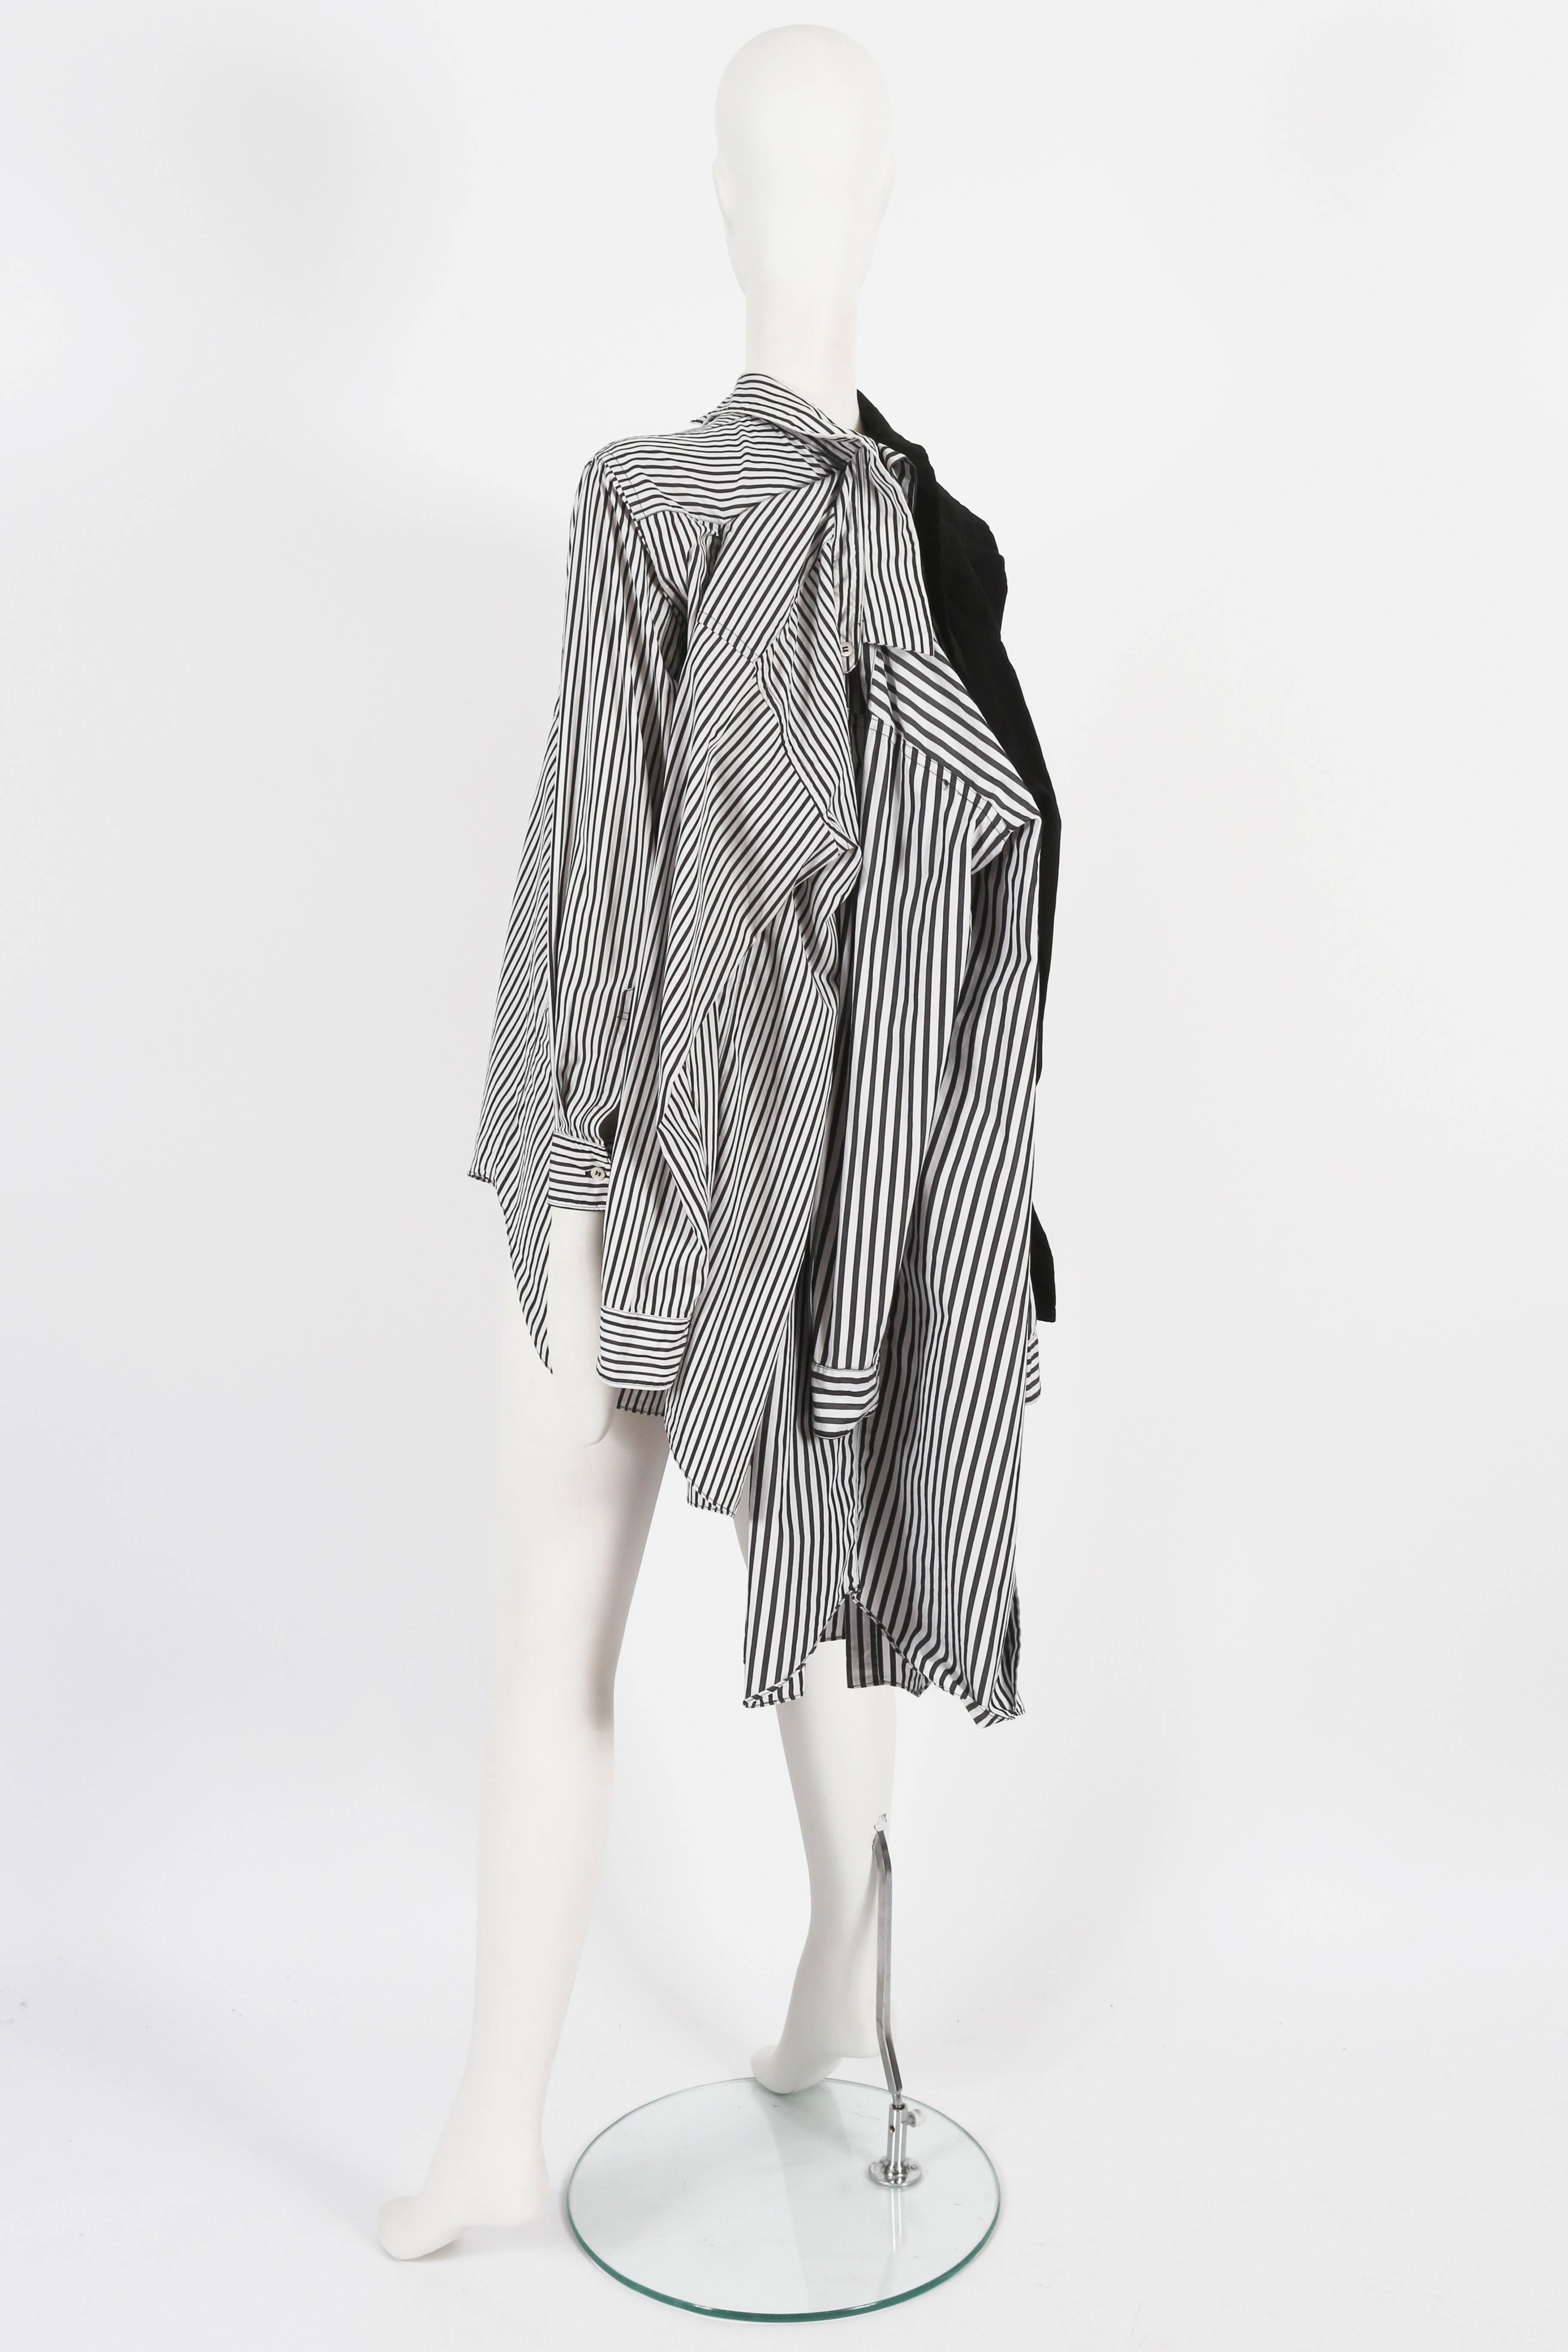 Presenting a rare Comme Des Garcons oversized deconstructed shirt from the spring-summer 2011 collection. This exceptional shirt is a true representation of the brand's avant-garde and innovative design philosophy.

Constructed from four layered